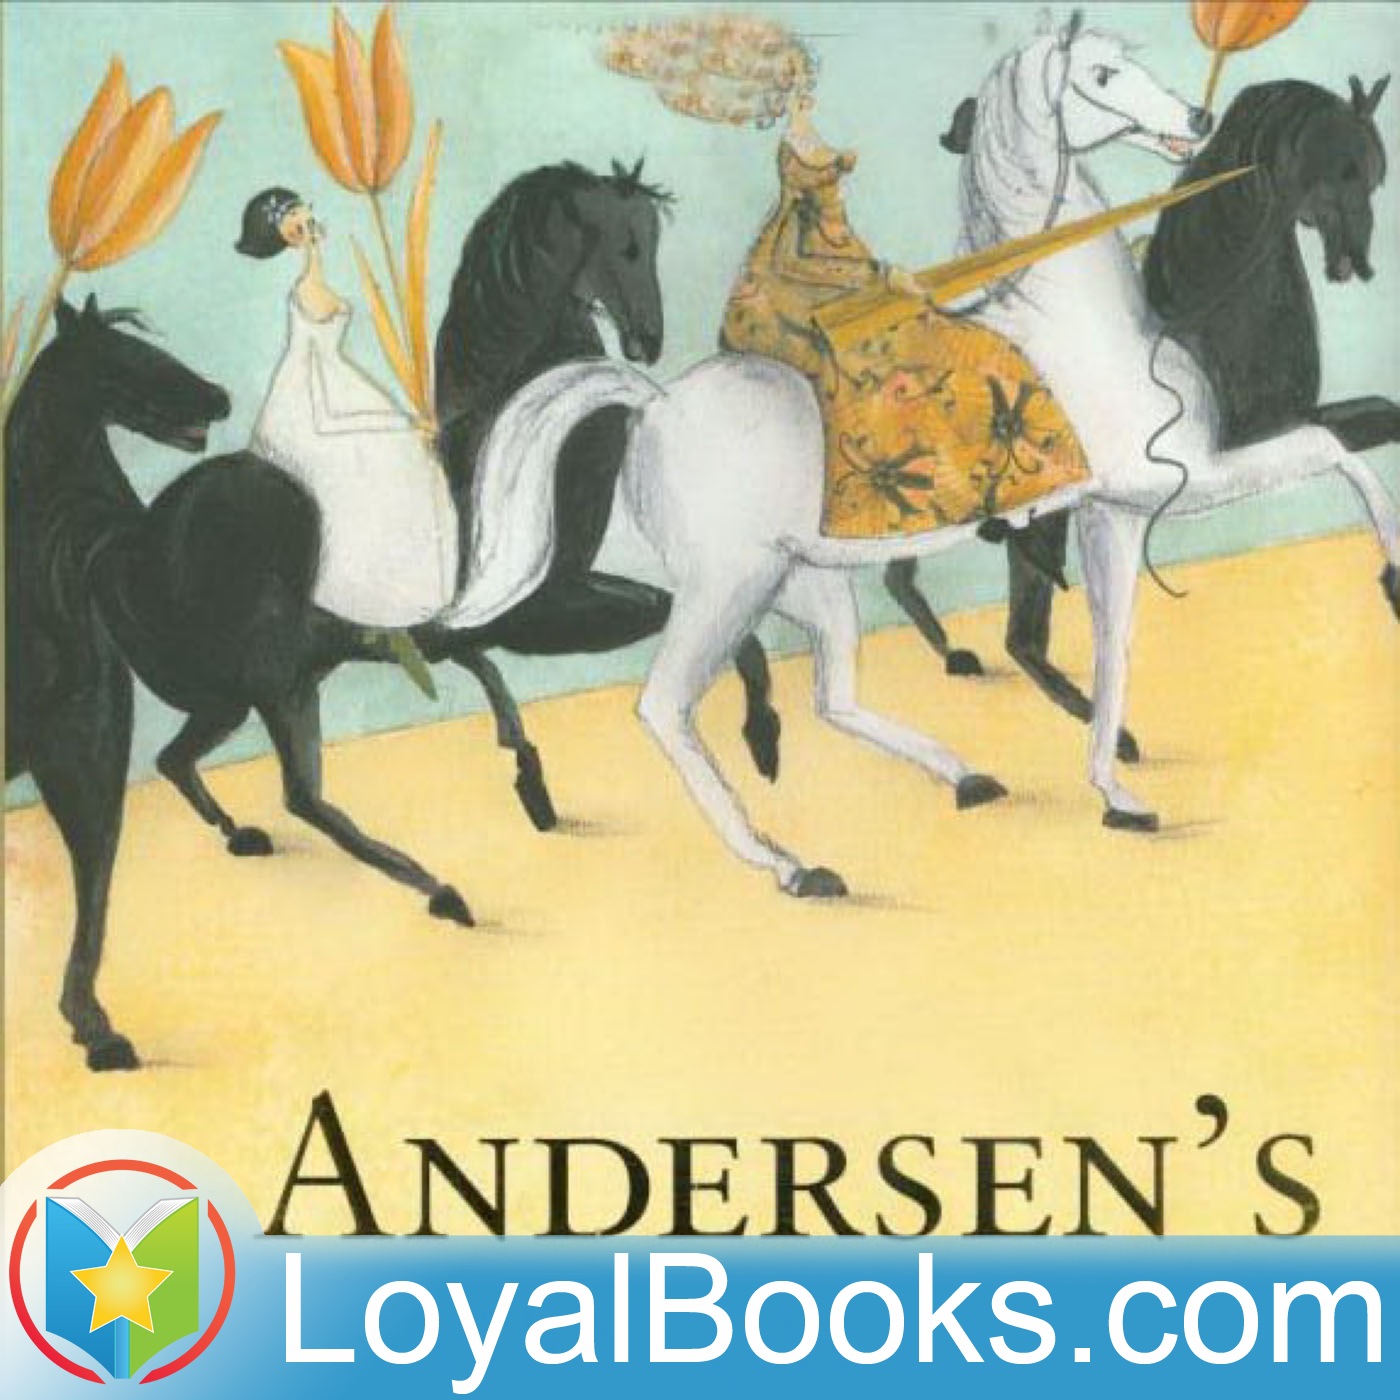 Andersen's Fairy Tales by Hans Christian Andersen - Free at Loyal Books